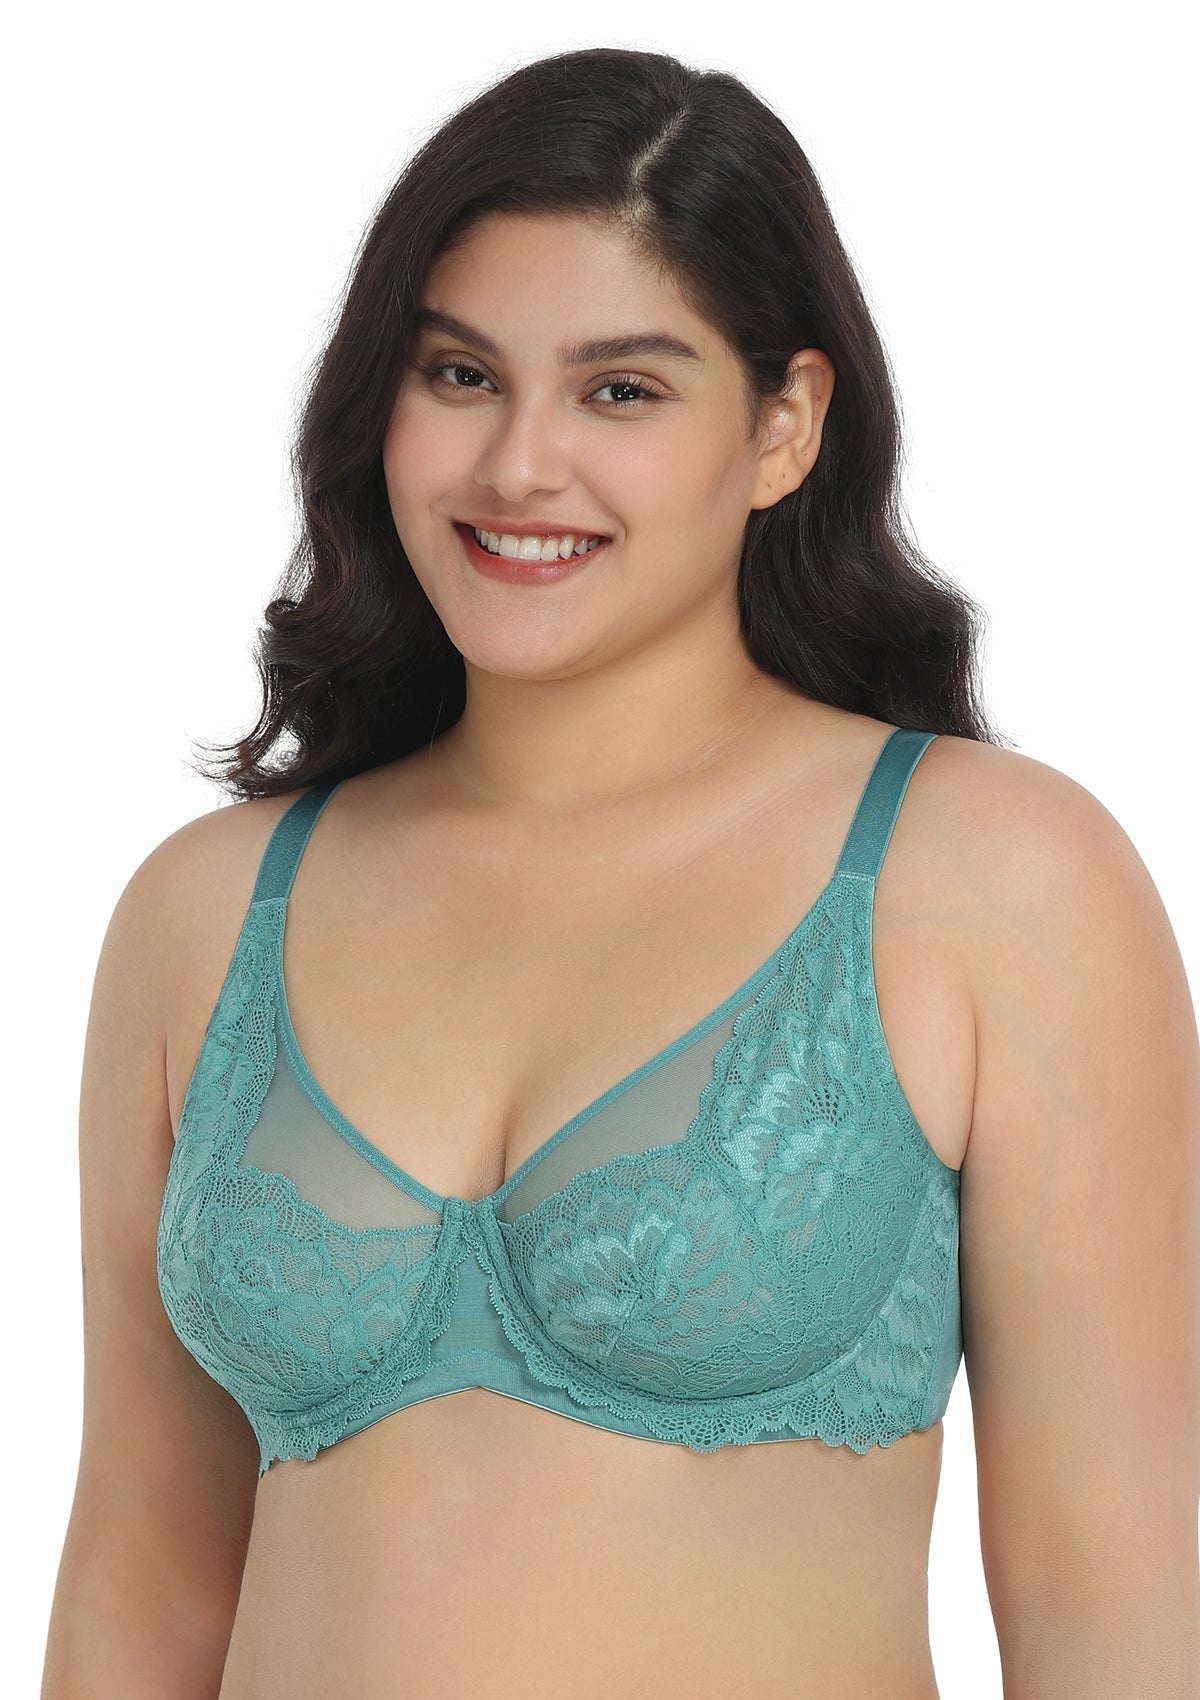 HSIA Paeonia Lace Full Coverage Underwire Non-Padded Uplifting Bra - Light Coral / 38 / DDD/F